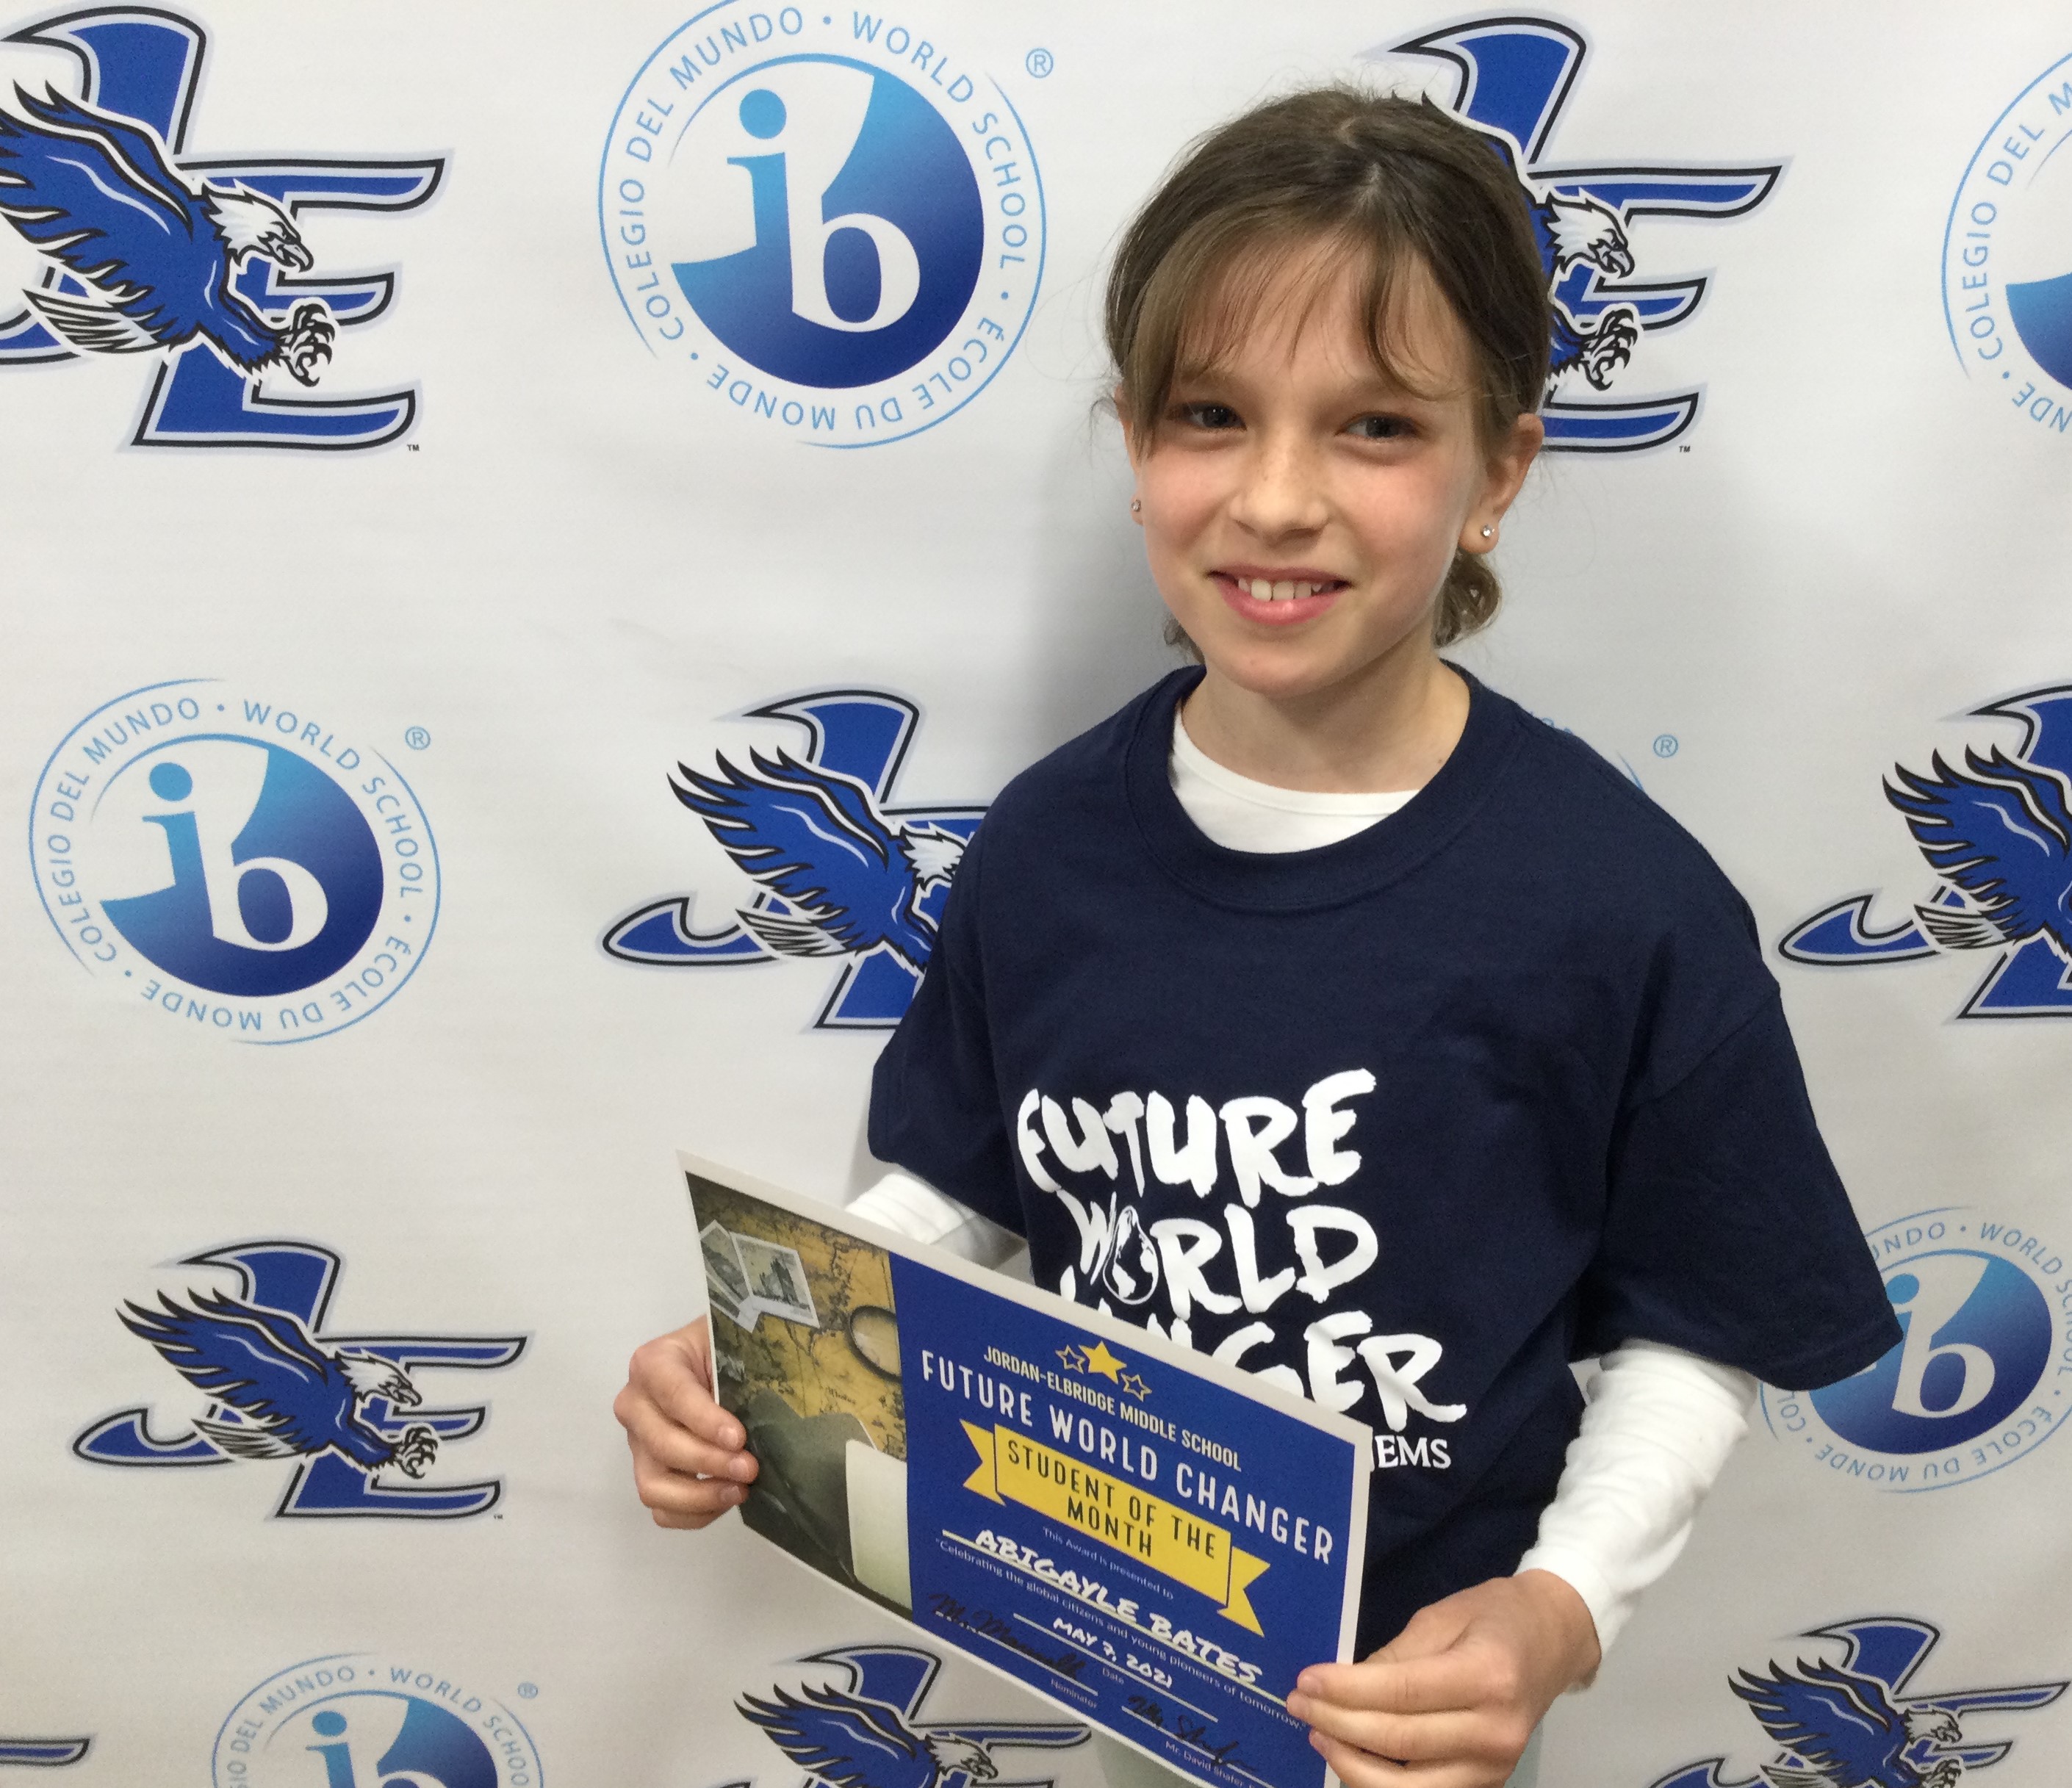 Abigayle Bates is recognized as an April 'Future World Changer'